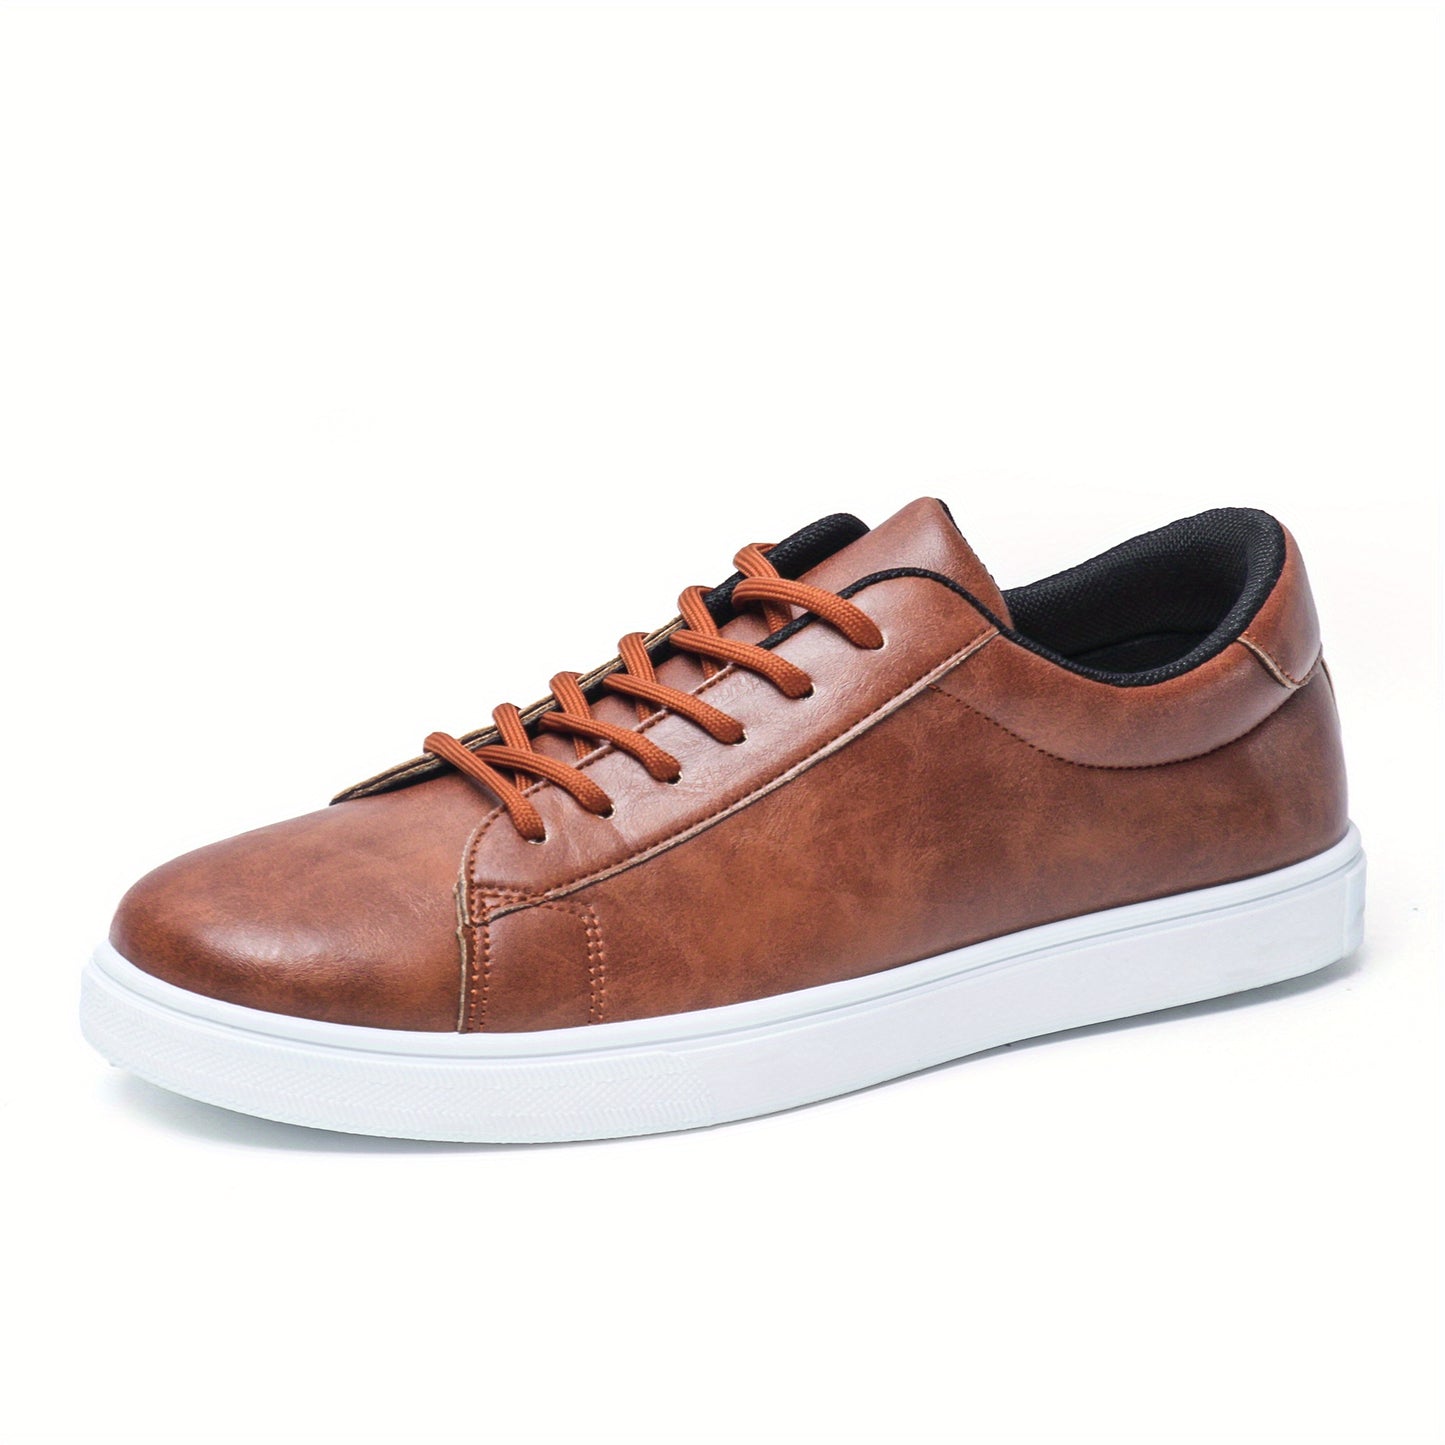 Men's Trendy Lace-Up Sneakers - Casual Outdoor Walking Shoes